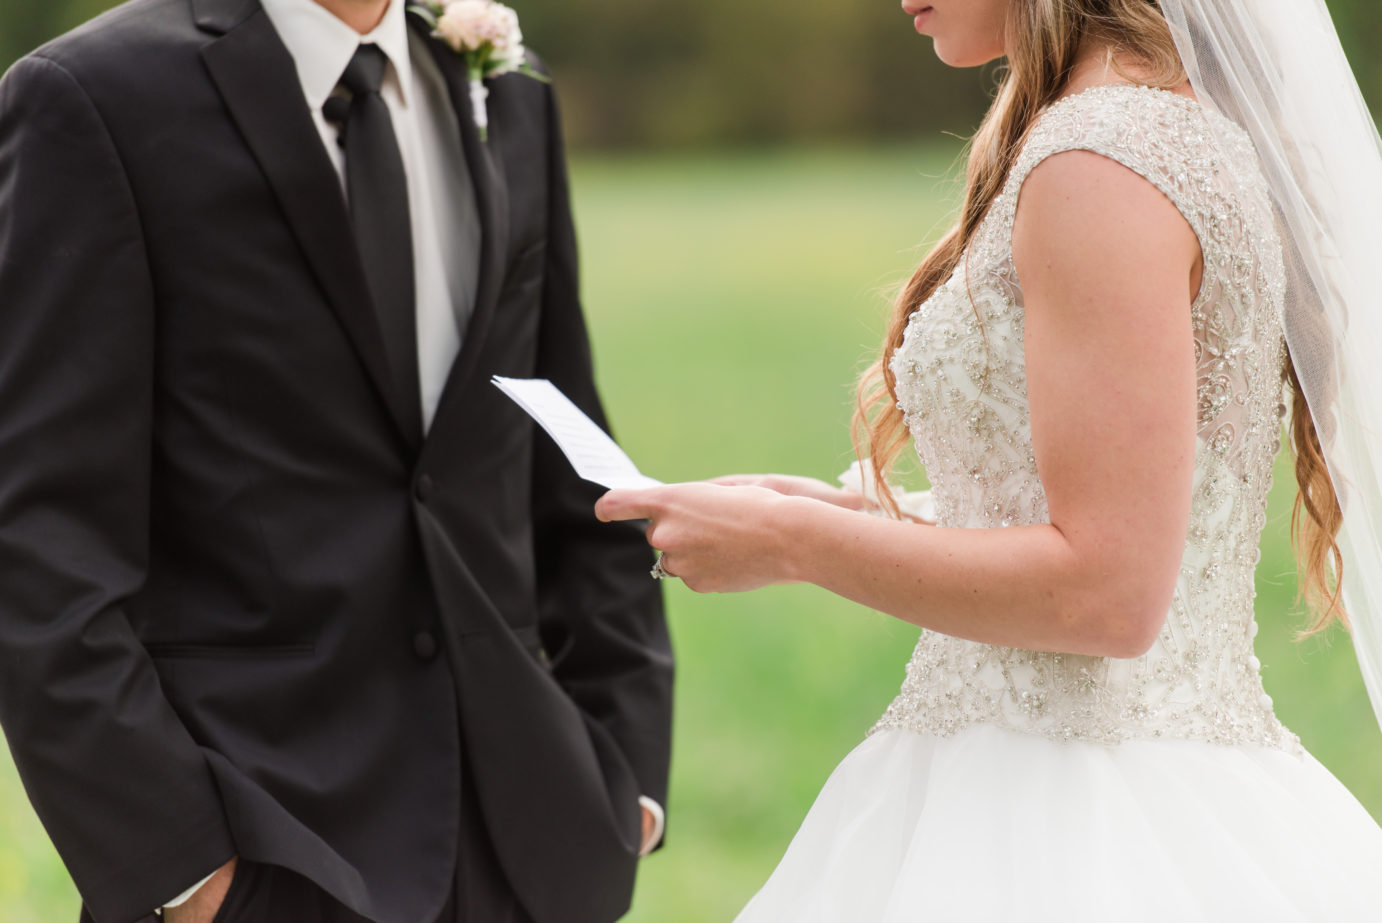 Making time for yourselves on a wedding day- Read your vows privately